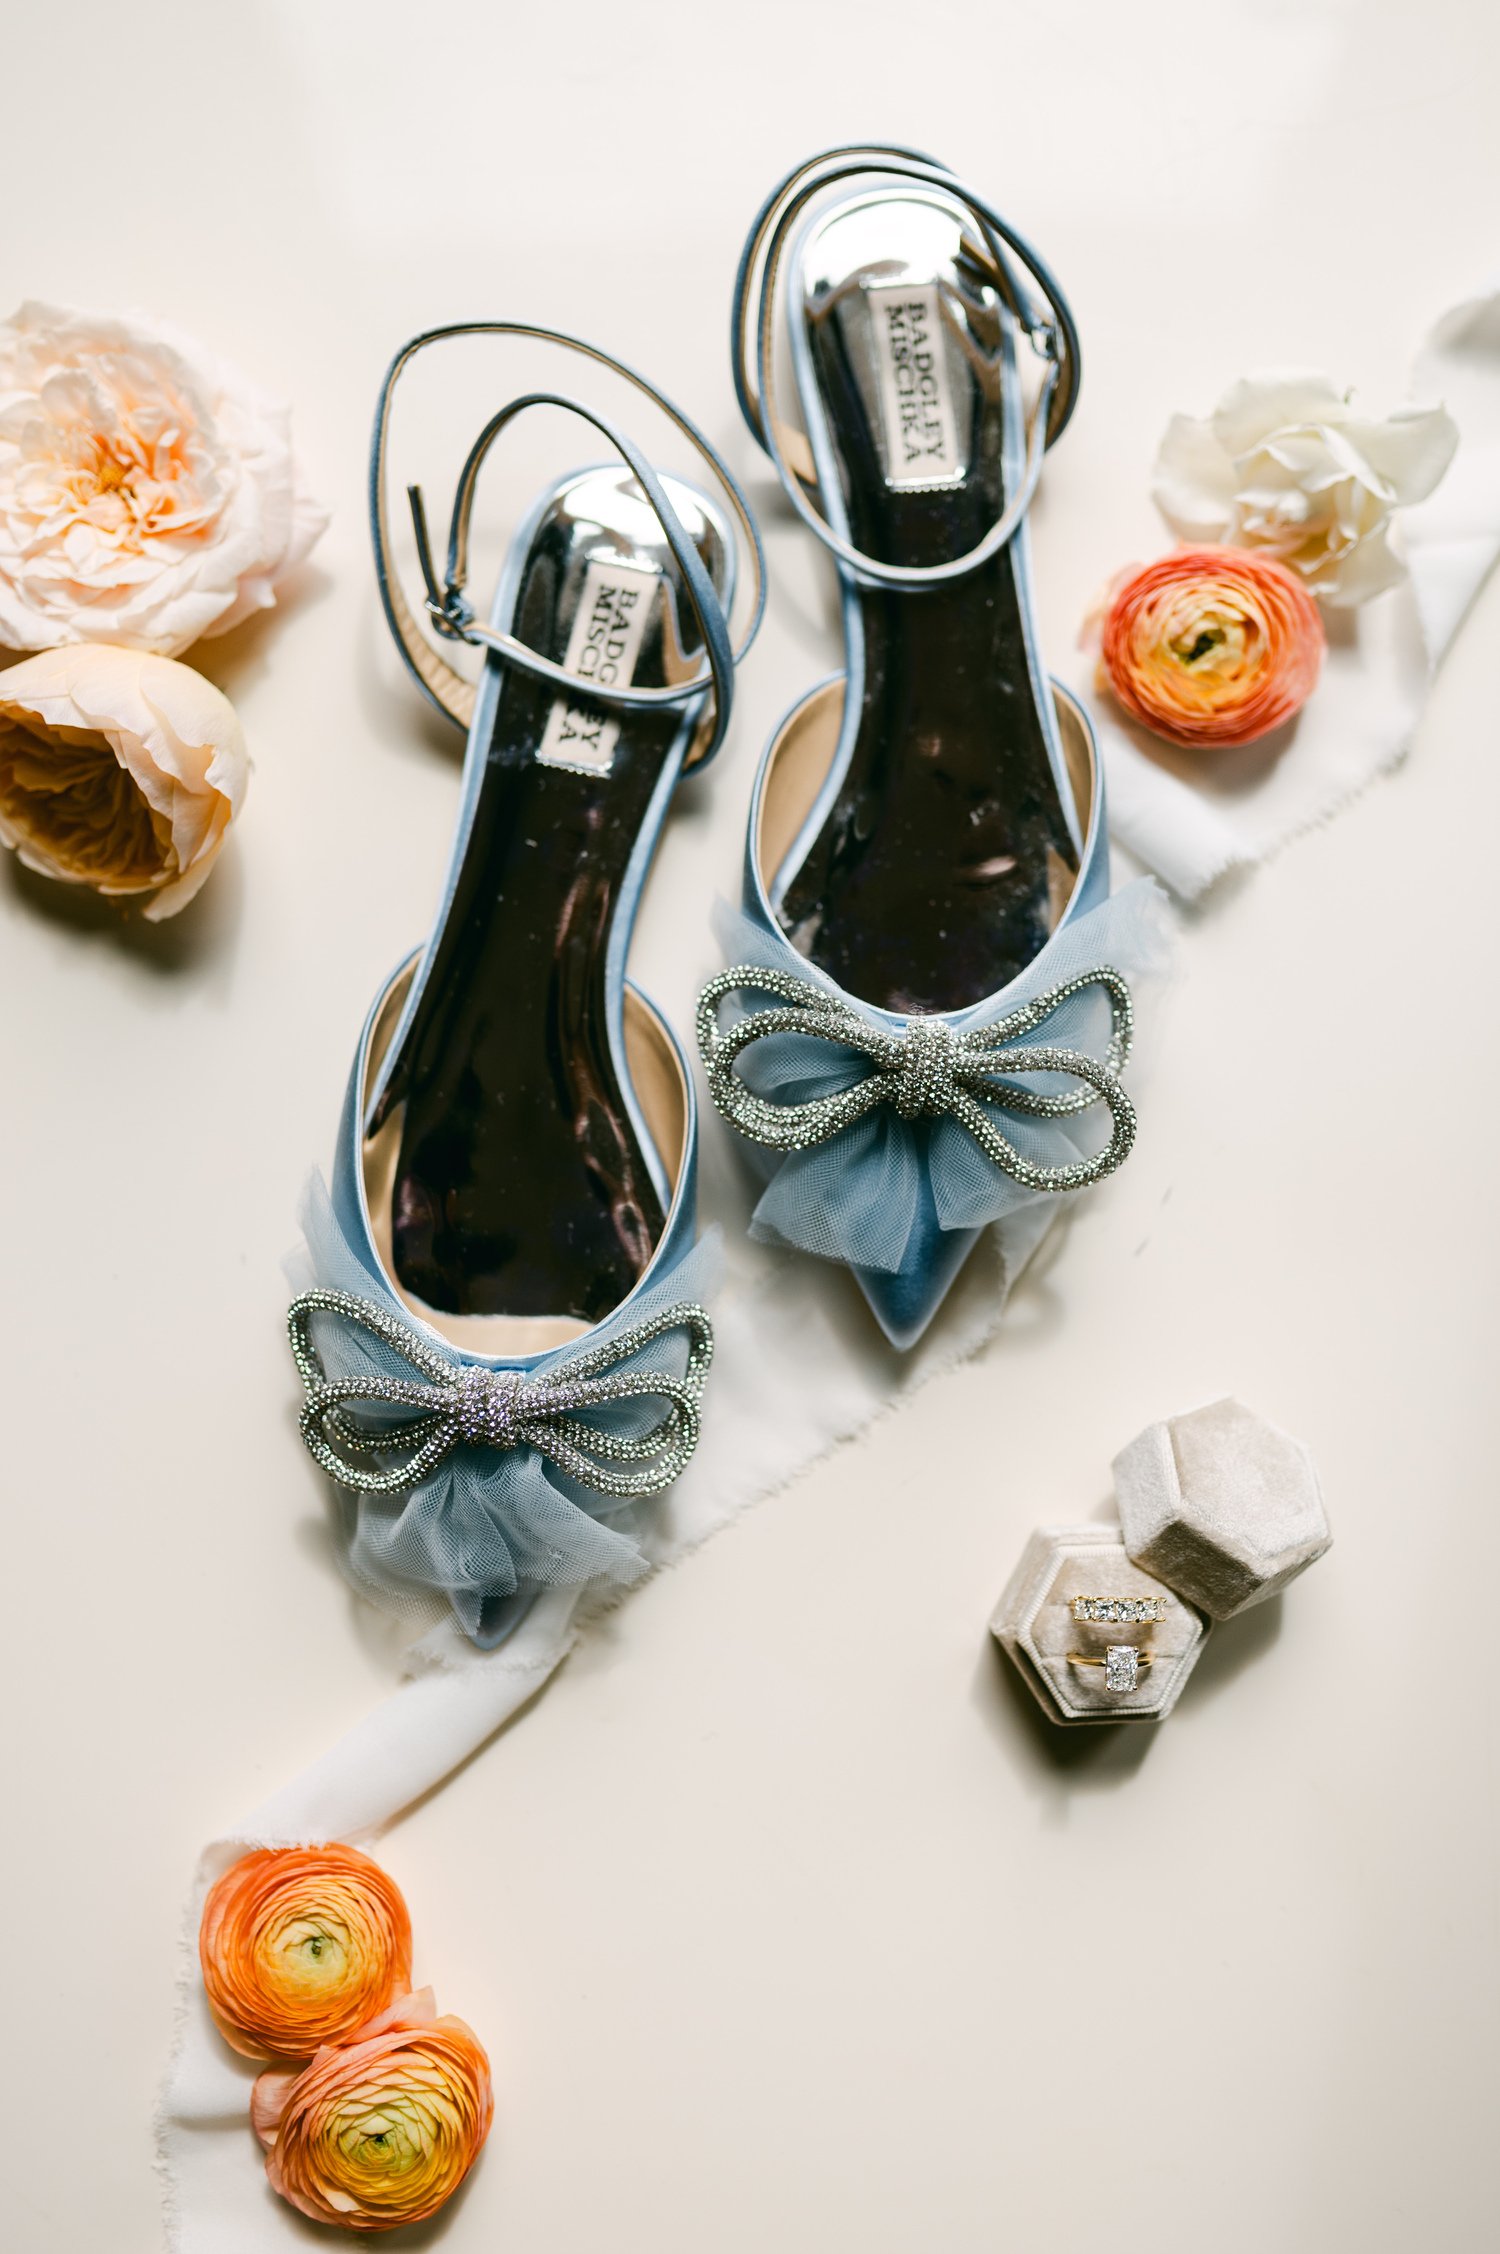 Elm Estate Wedding photos, photo of the bride’s blue wedding shoes with bow details